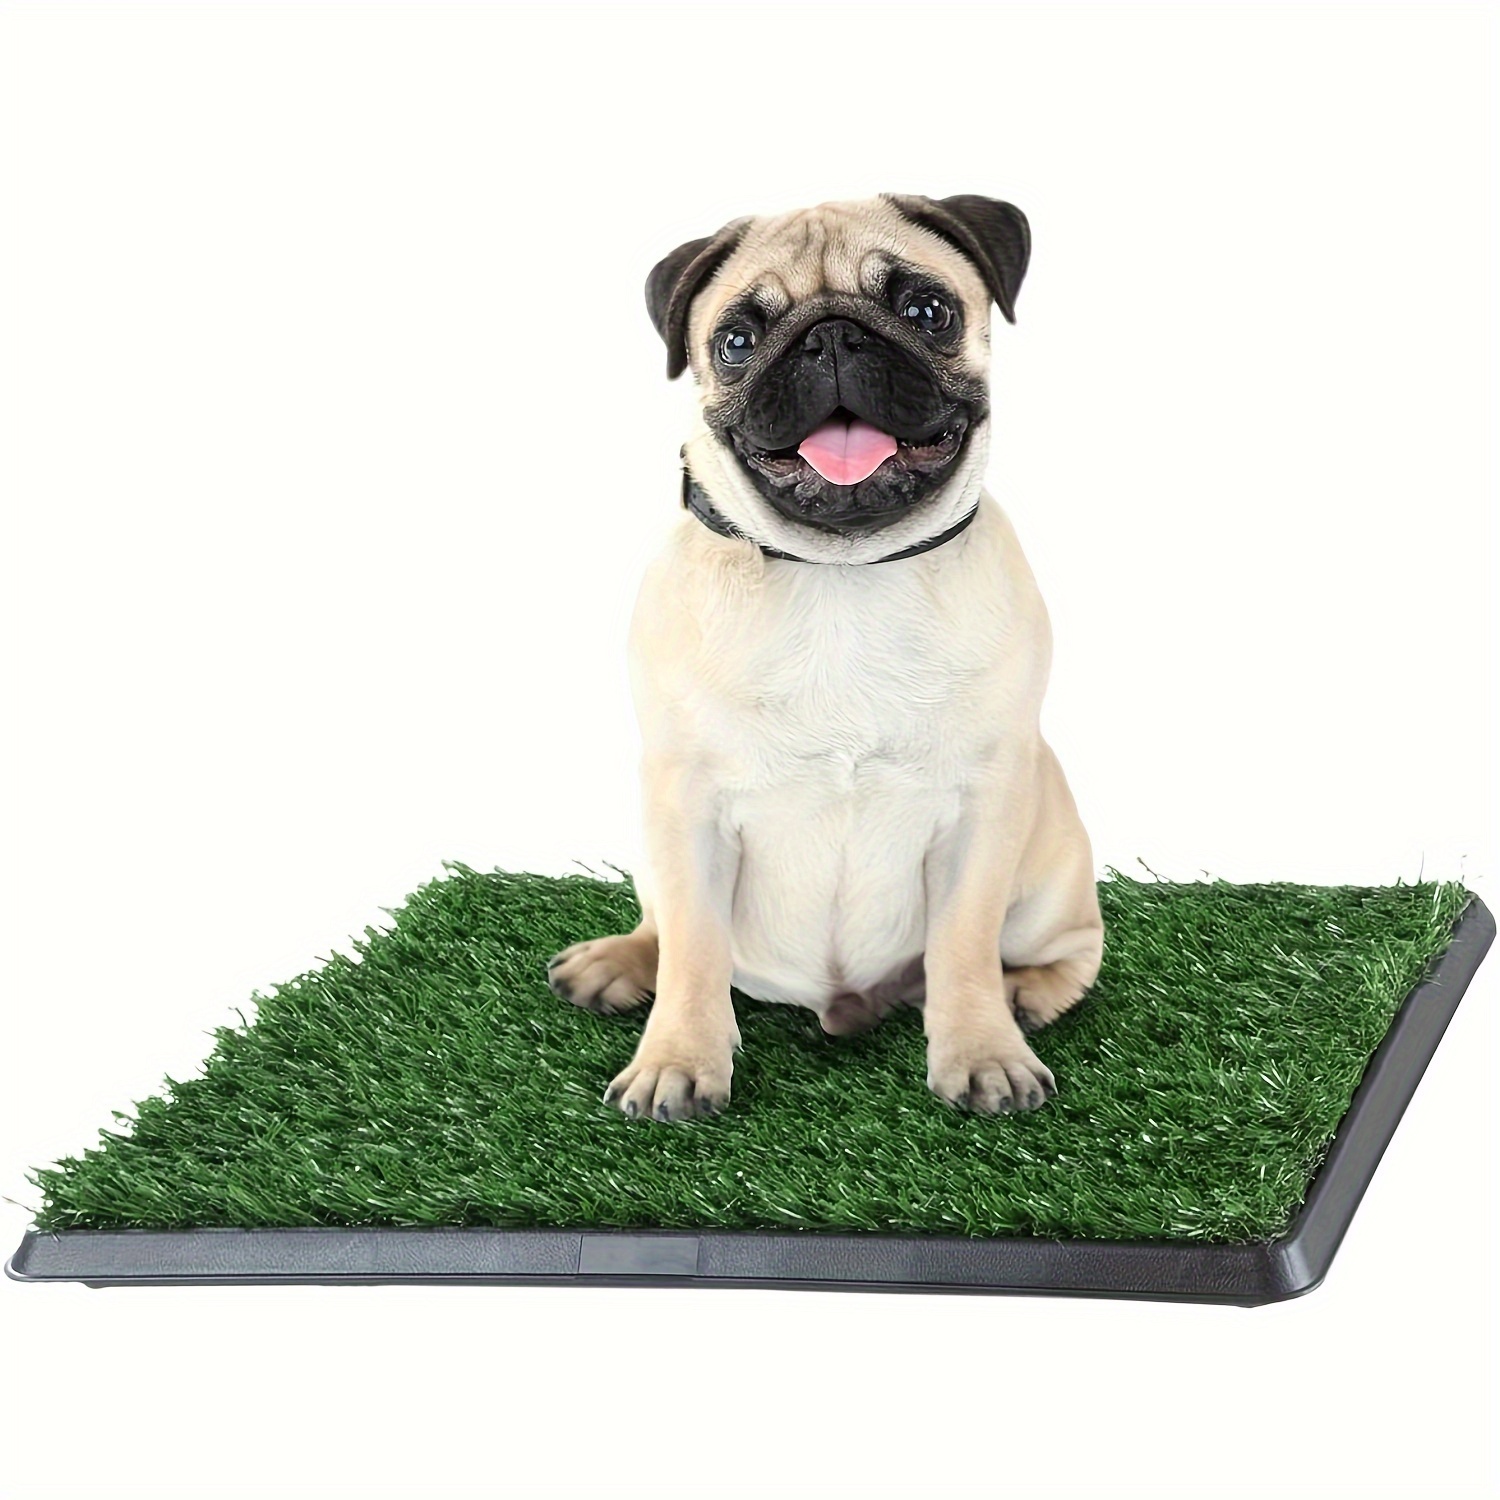 

leak-proof" Washable Dog Potty Tray With 3-layer System - Indoor/outdoor Puppy Training Pad, Durable Plastic Litter Box (20x16inch Grass Mat Included) Dog Pee Pads Washable Dog Pee Pad Tray